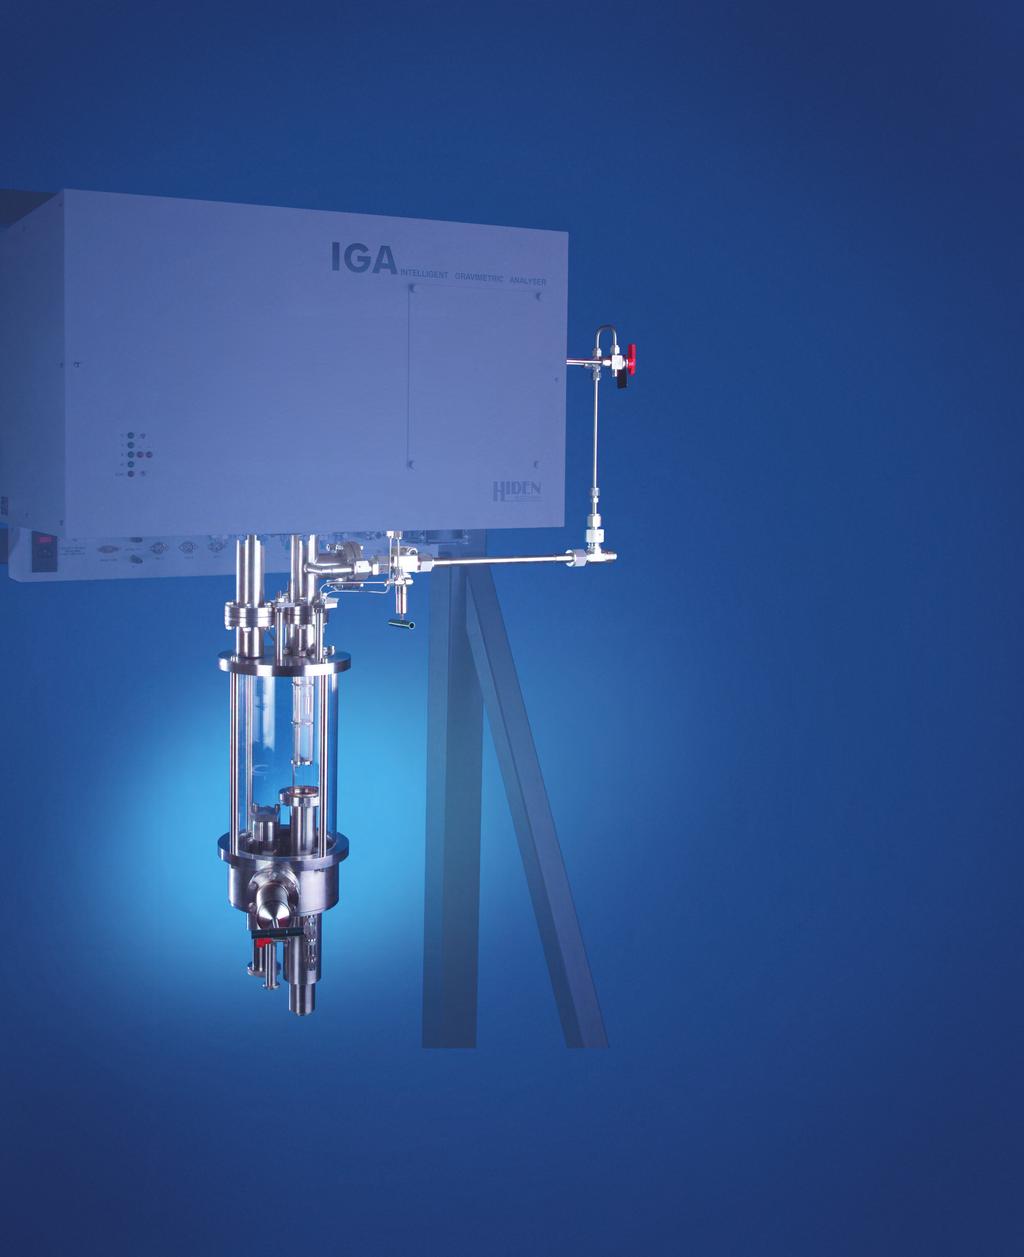 Technical Specifications The IGA-1 is designed for gravimetric mixed gas sorption, as well as single component vapor sorption analysis, and powerfully combines the features of the IGA-1, IGA-2 and